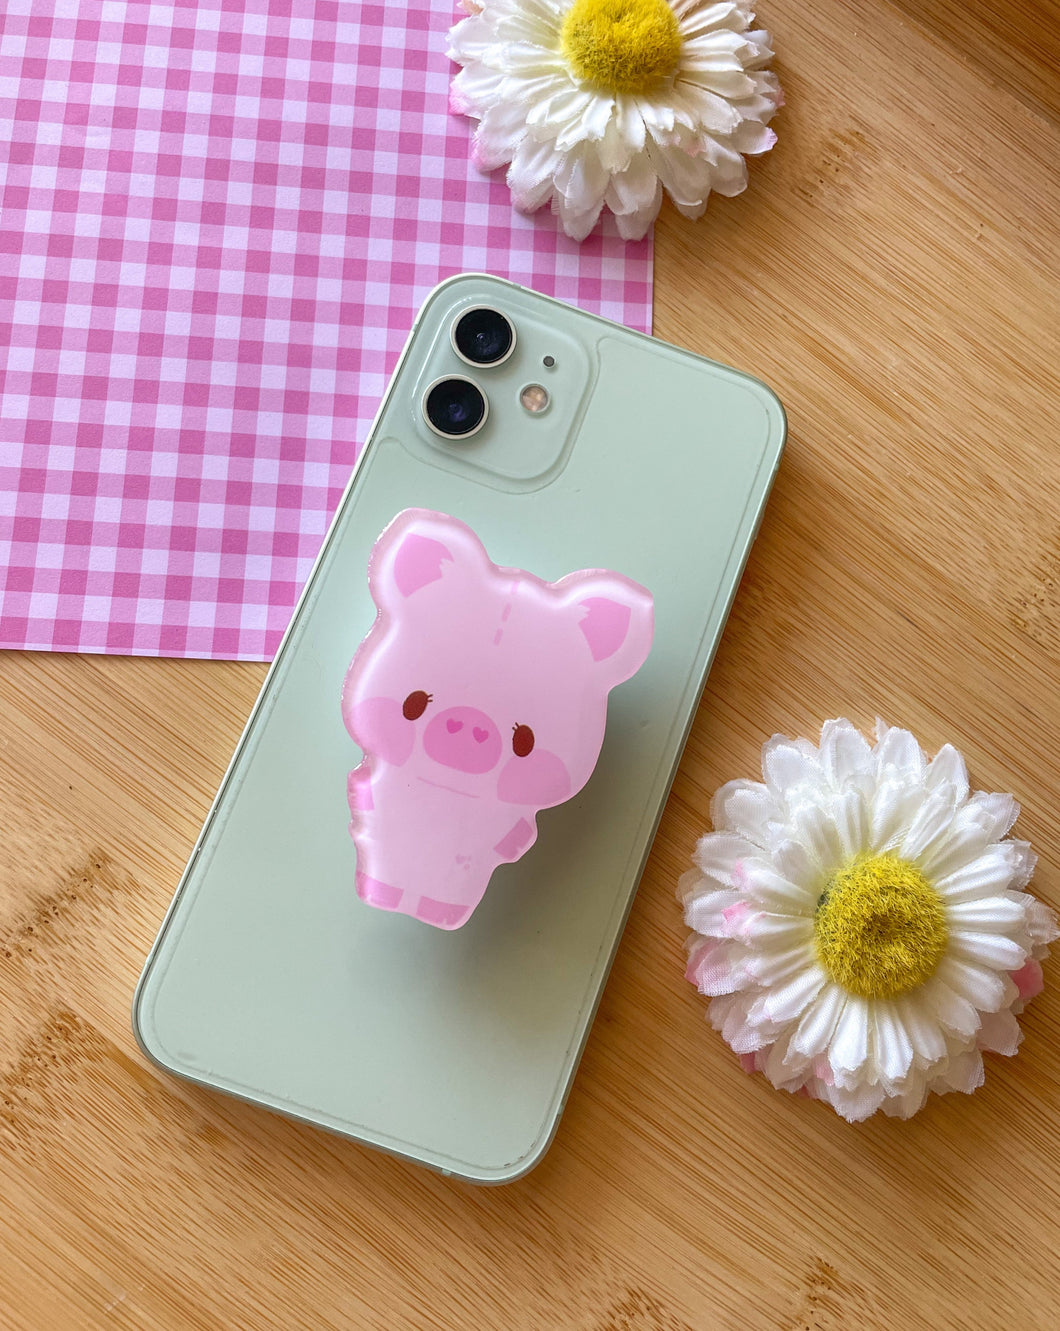 Biscuit the Pig phone grippy